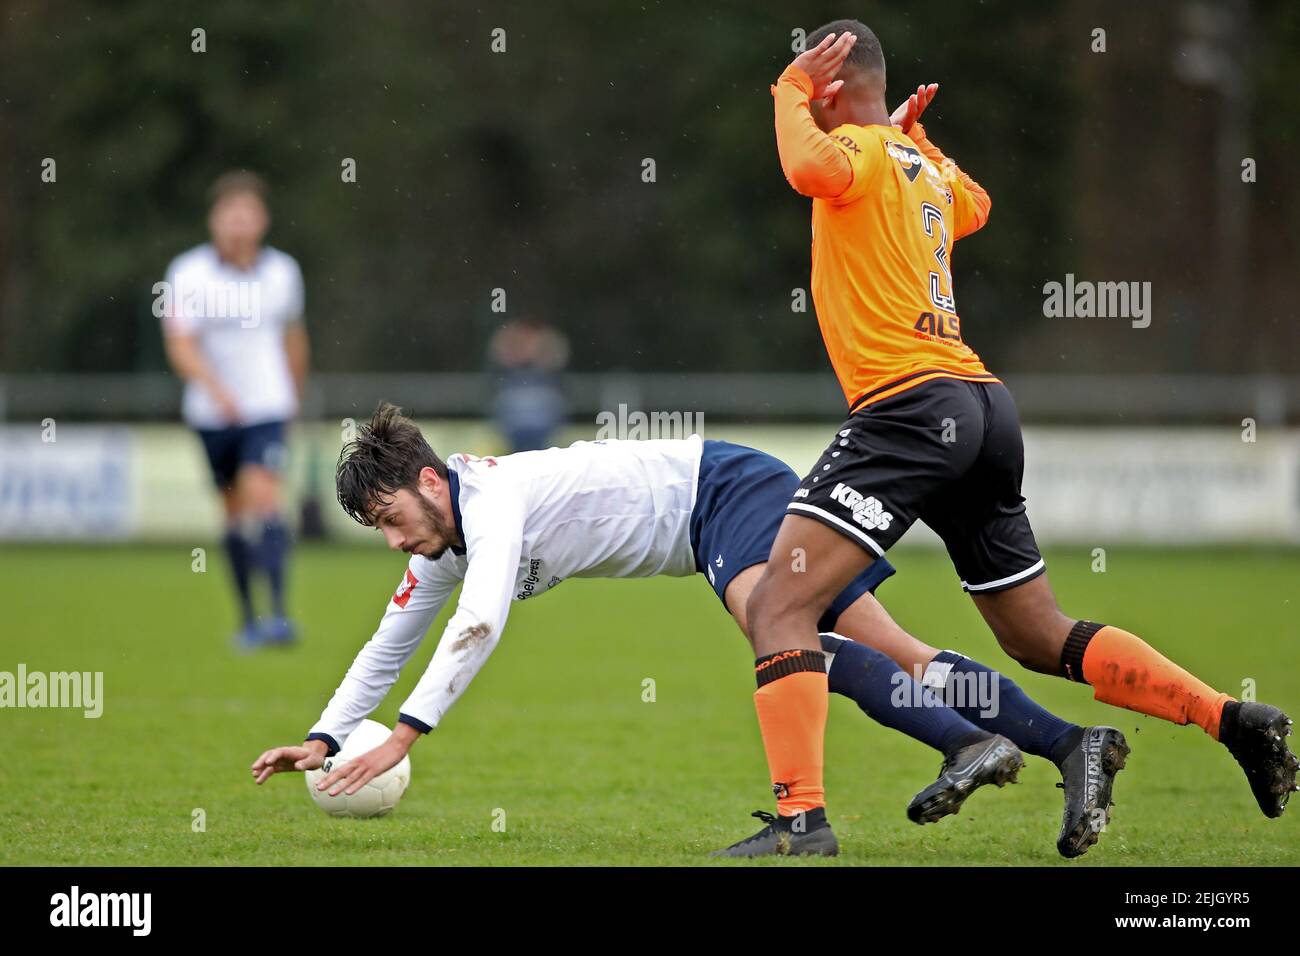 HAARLEM, 08-02-2020, Football, Sportcomplex HFC, season 2019 / 20120, Dutch Tweede Divisie, During the game vs (Photo by Pro Shots/Sipa USA) Stock Photo